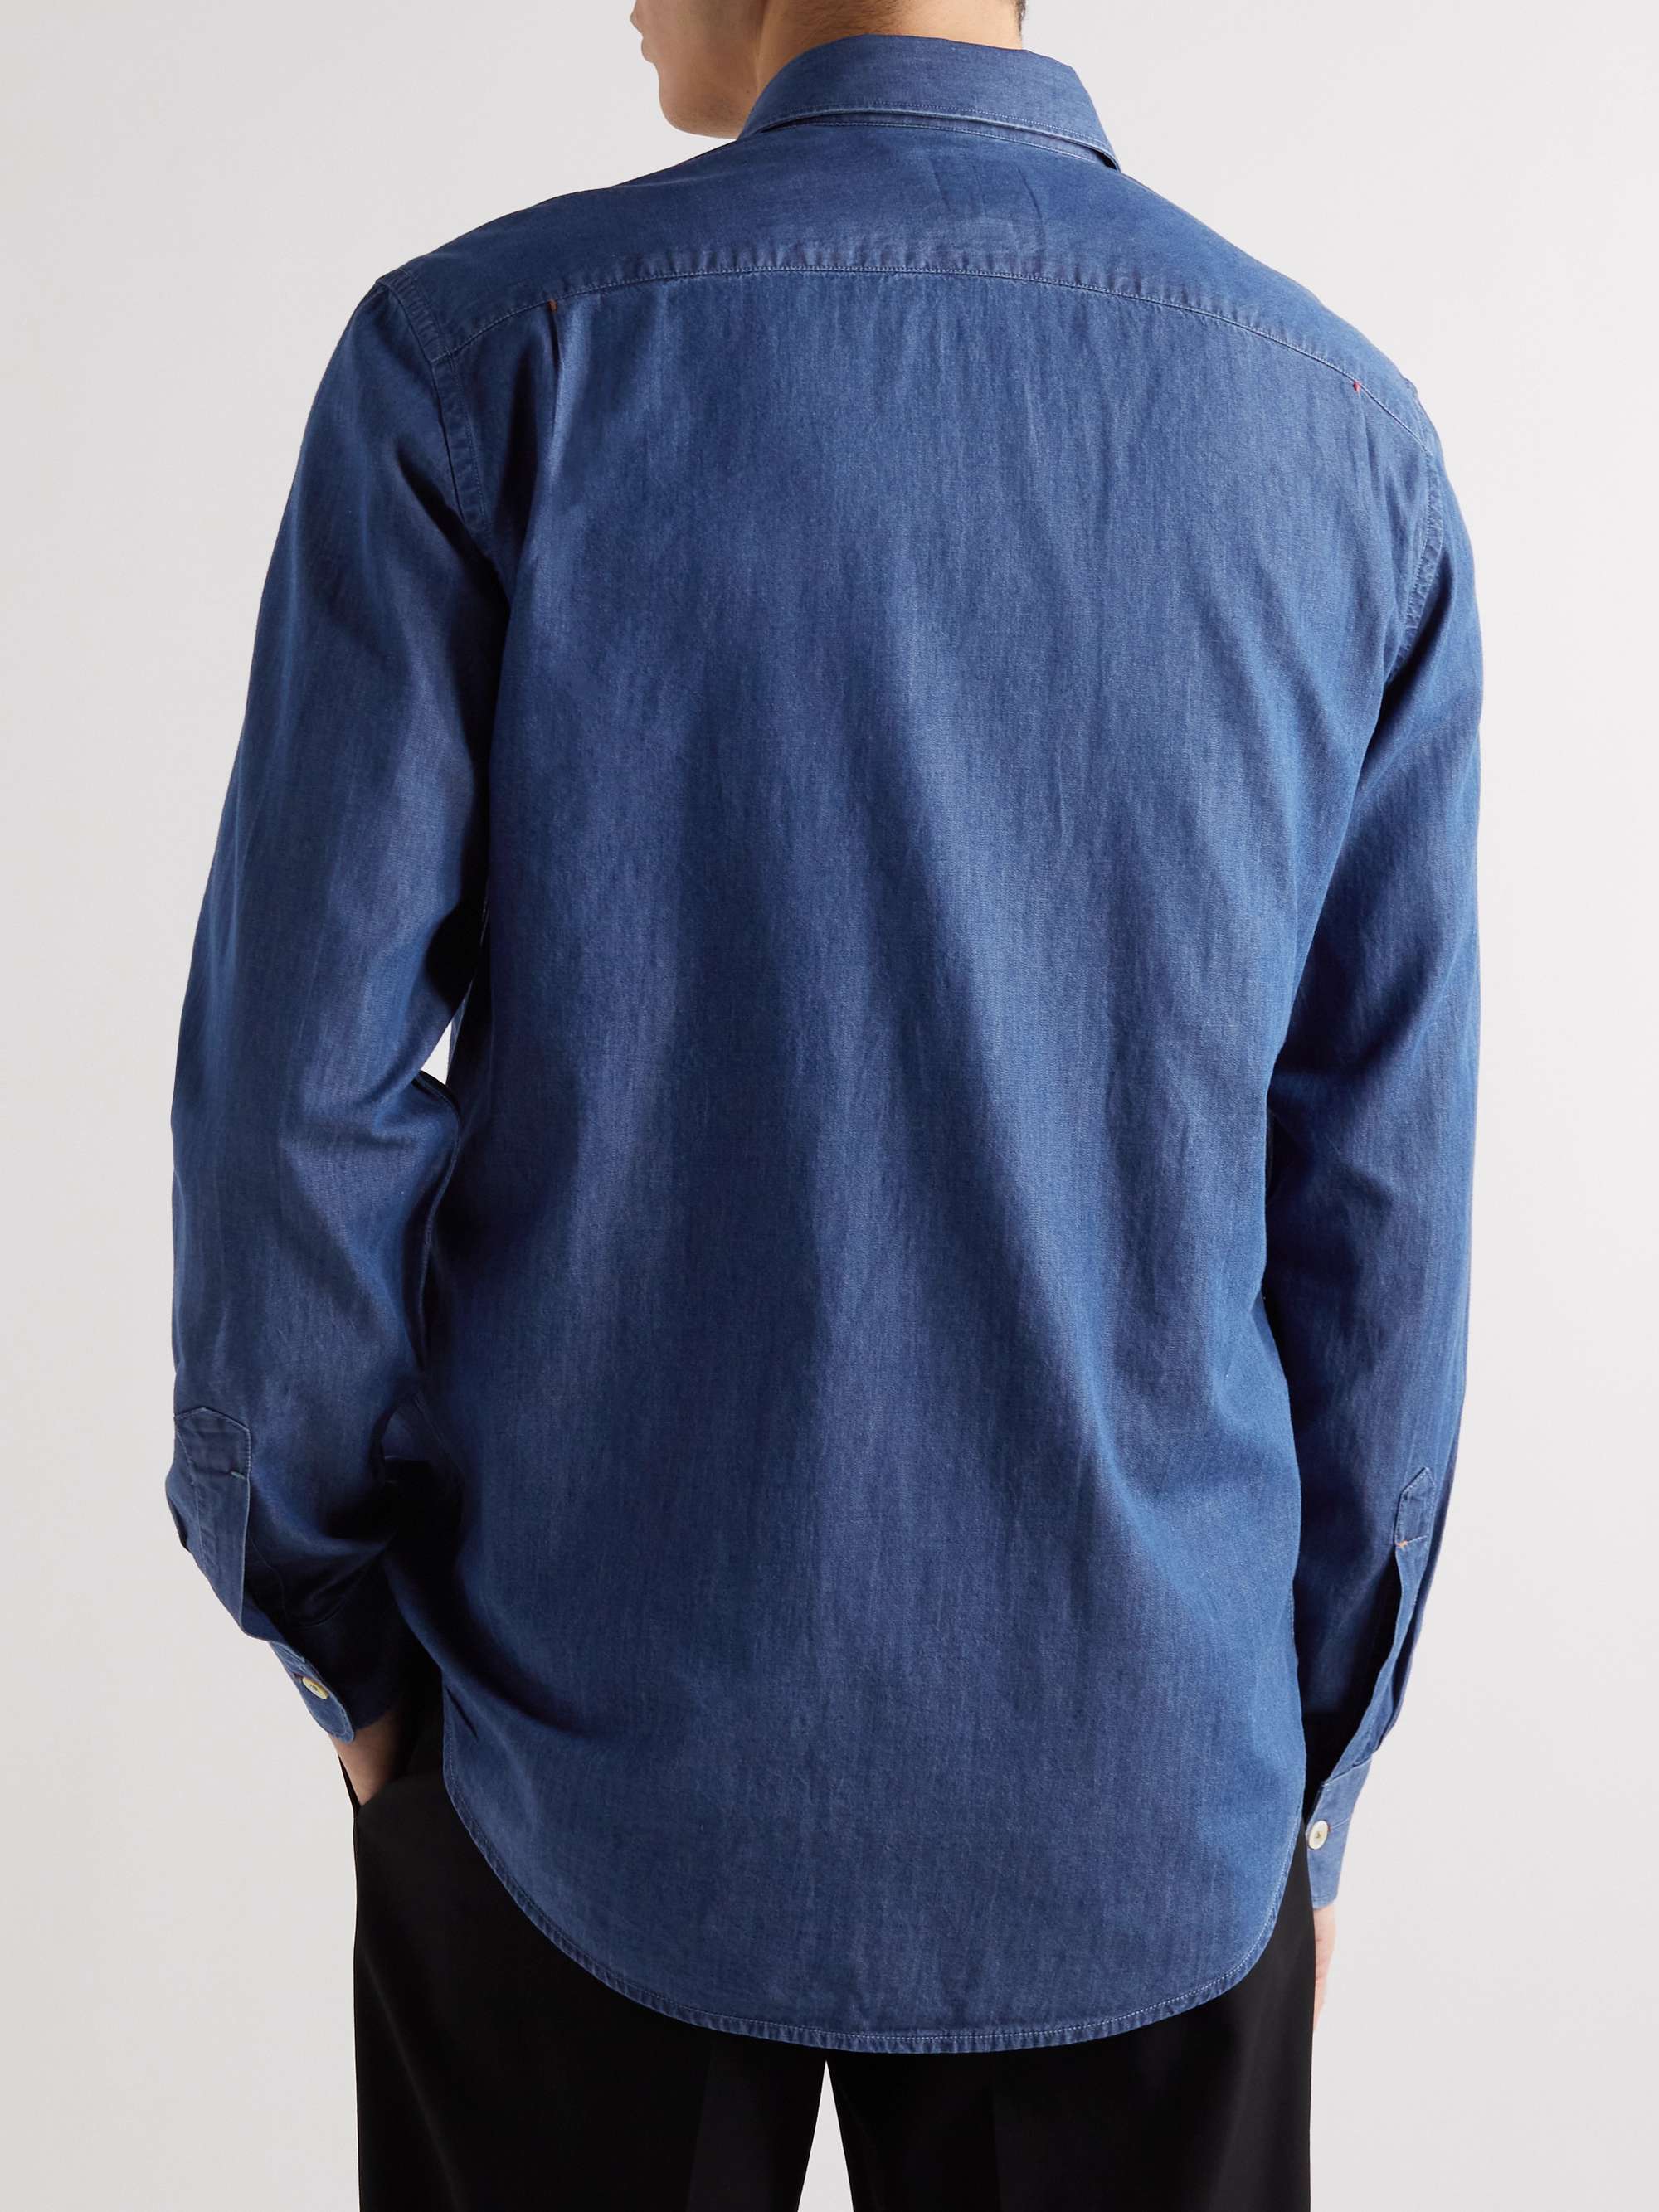 PAUL SMITH Cotton and Lyocell-Blend Chambray Shirt | MR PORTER